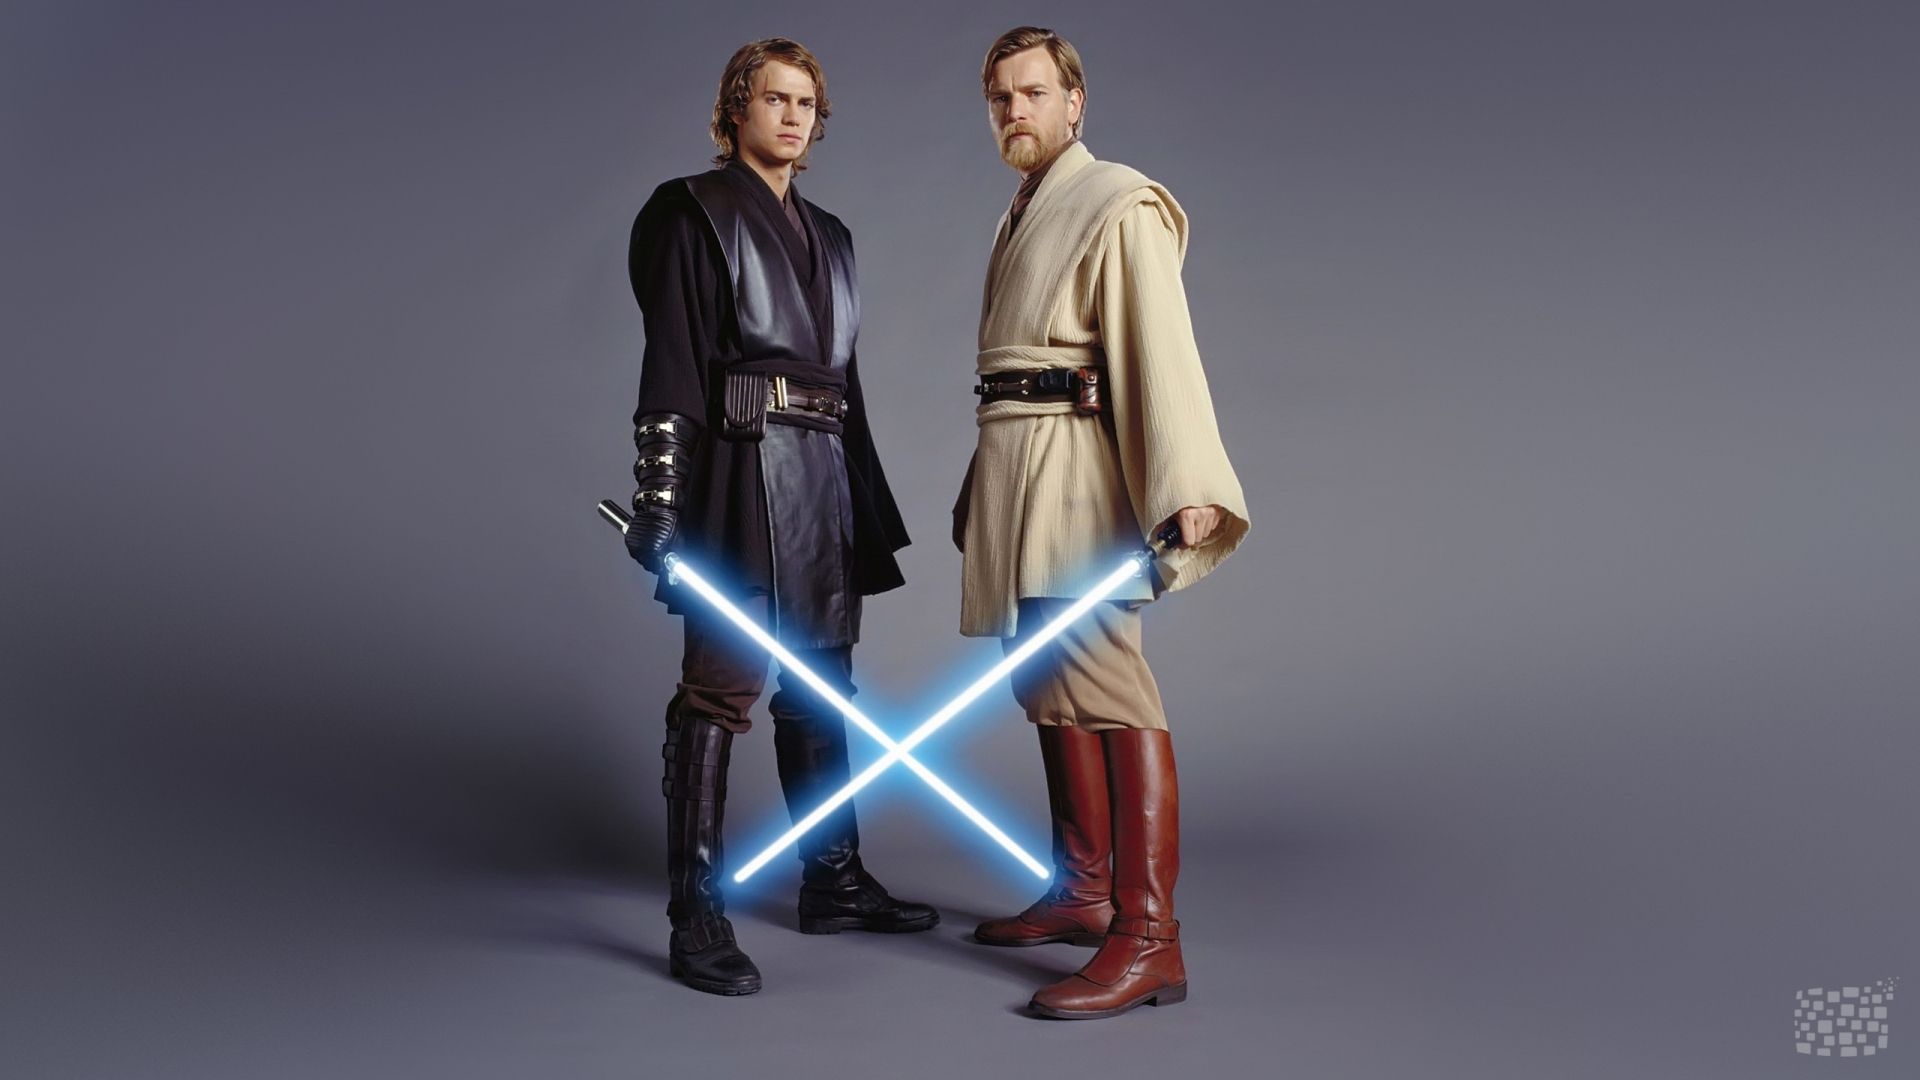 Star Wars Episode III. Revenge of the Sith wallpapers and images